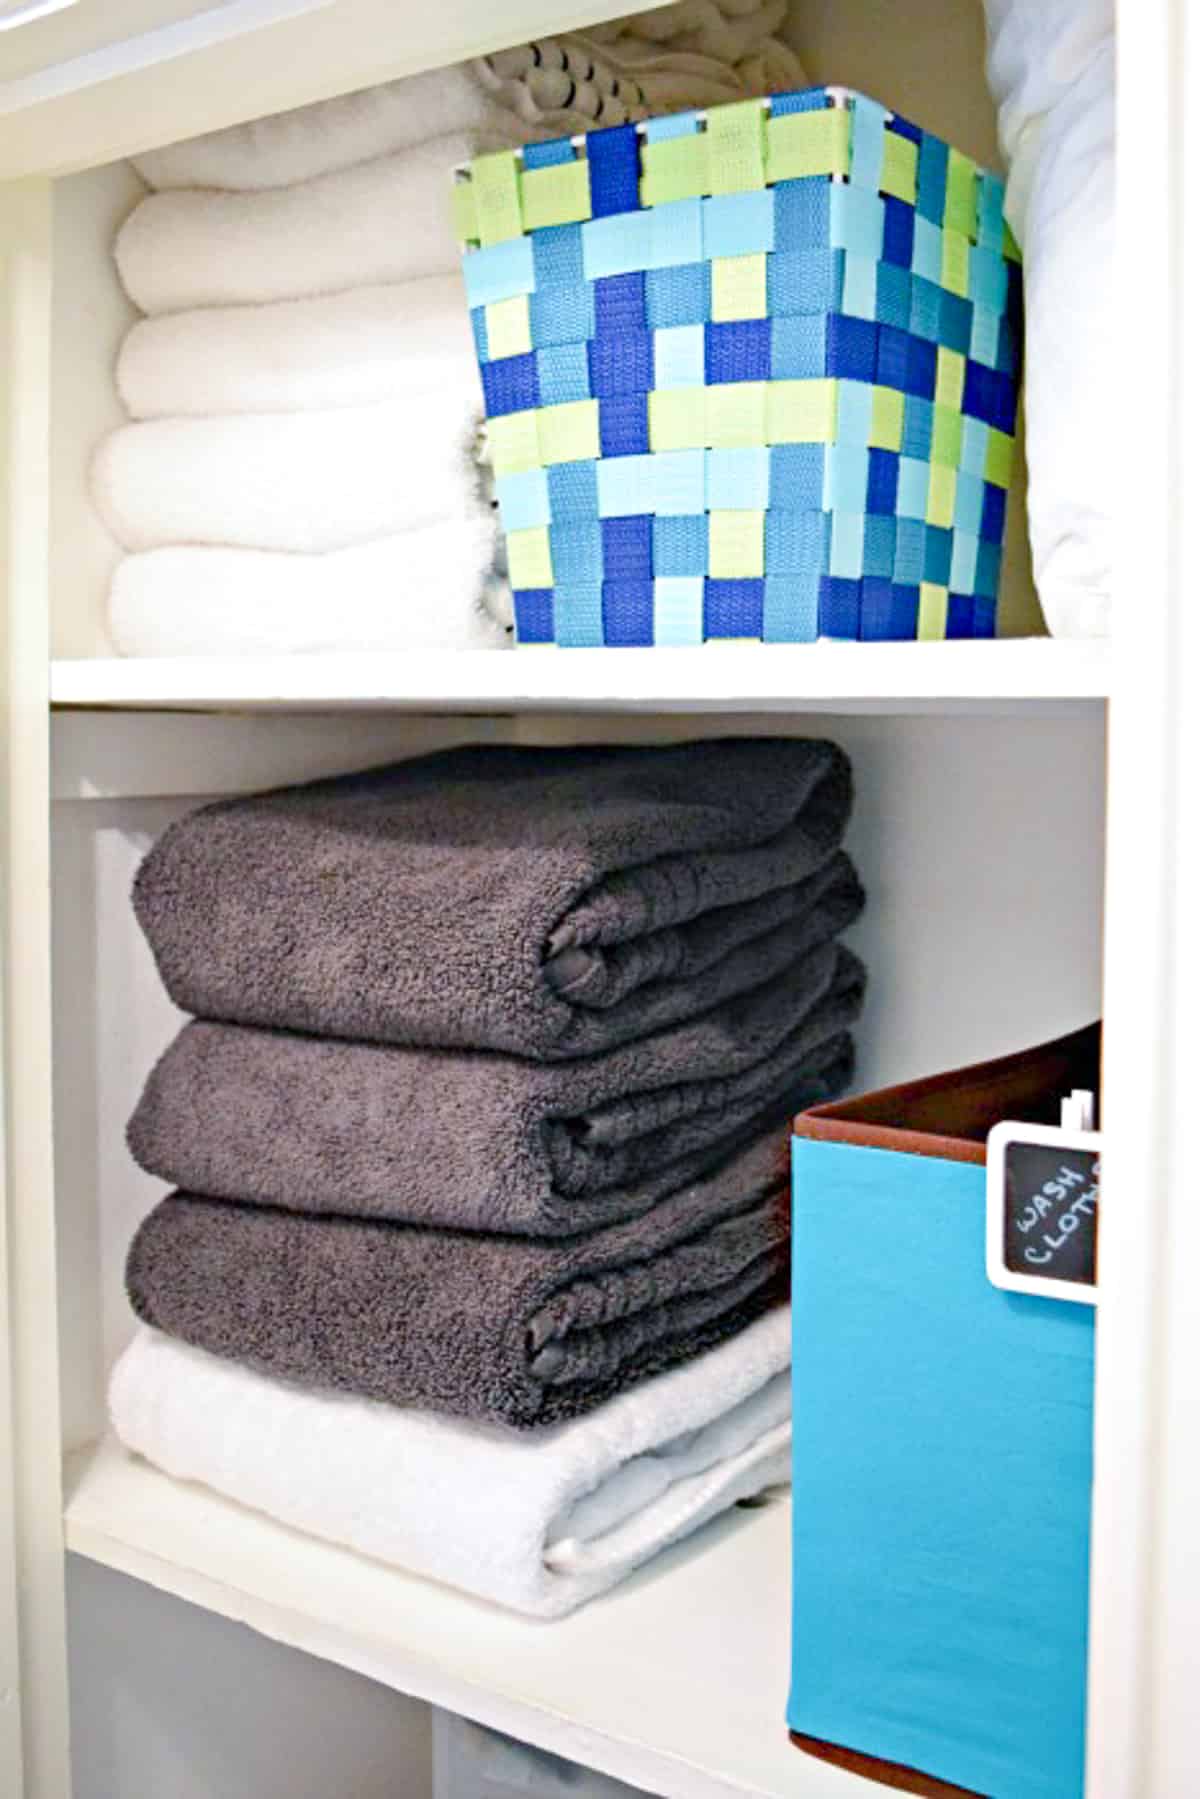 linen closet shelves organized with products from Daiso